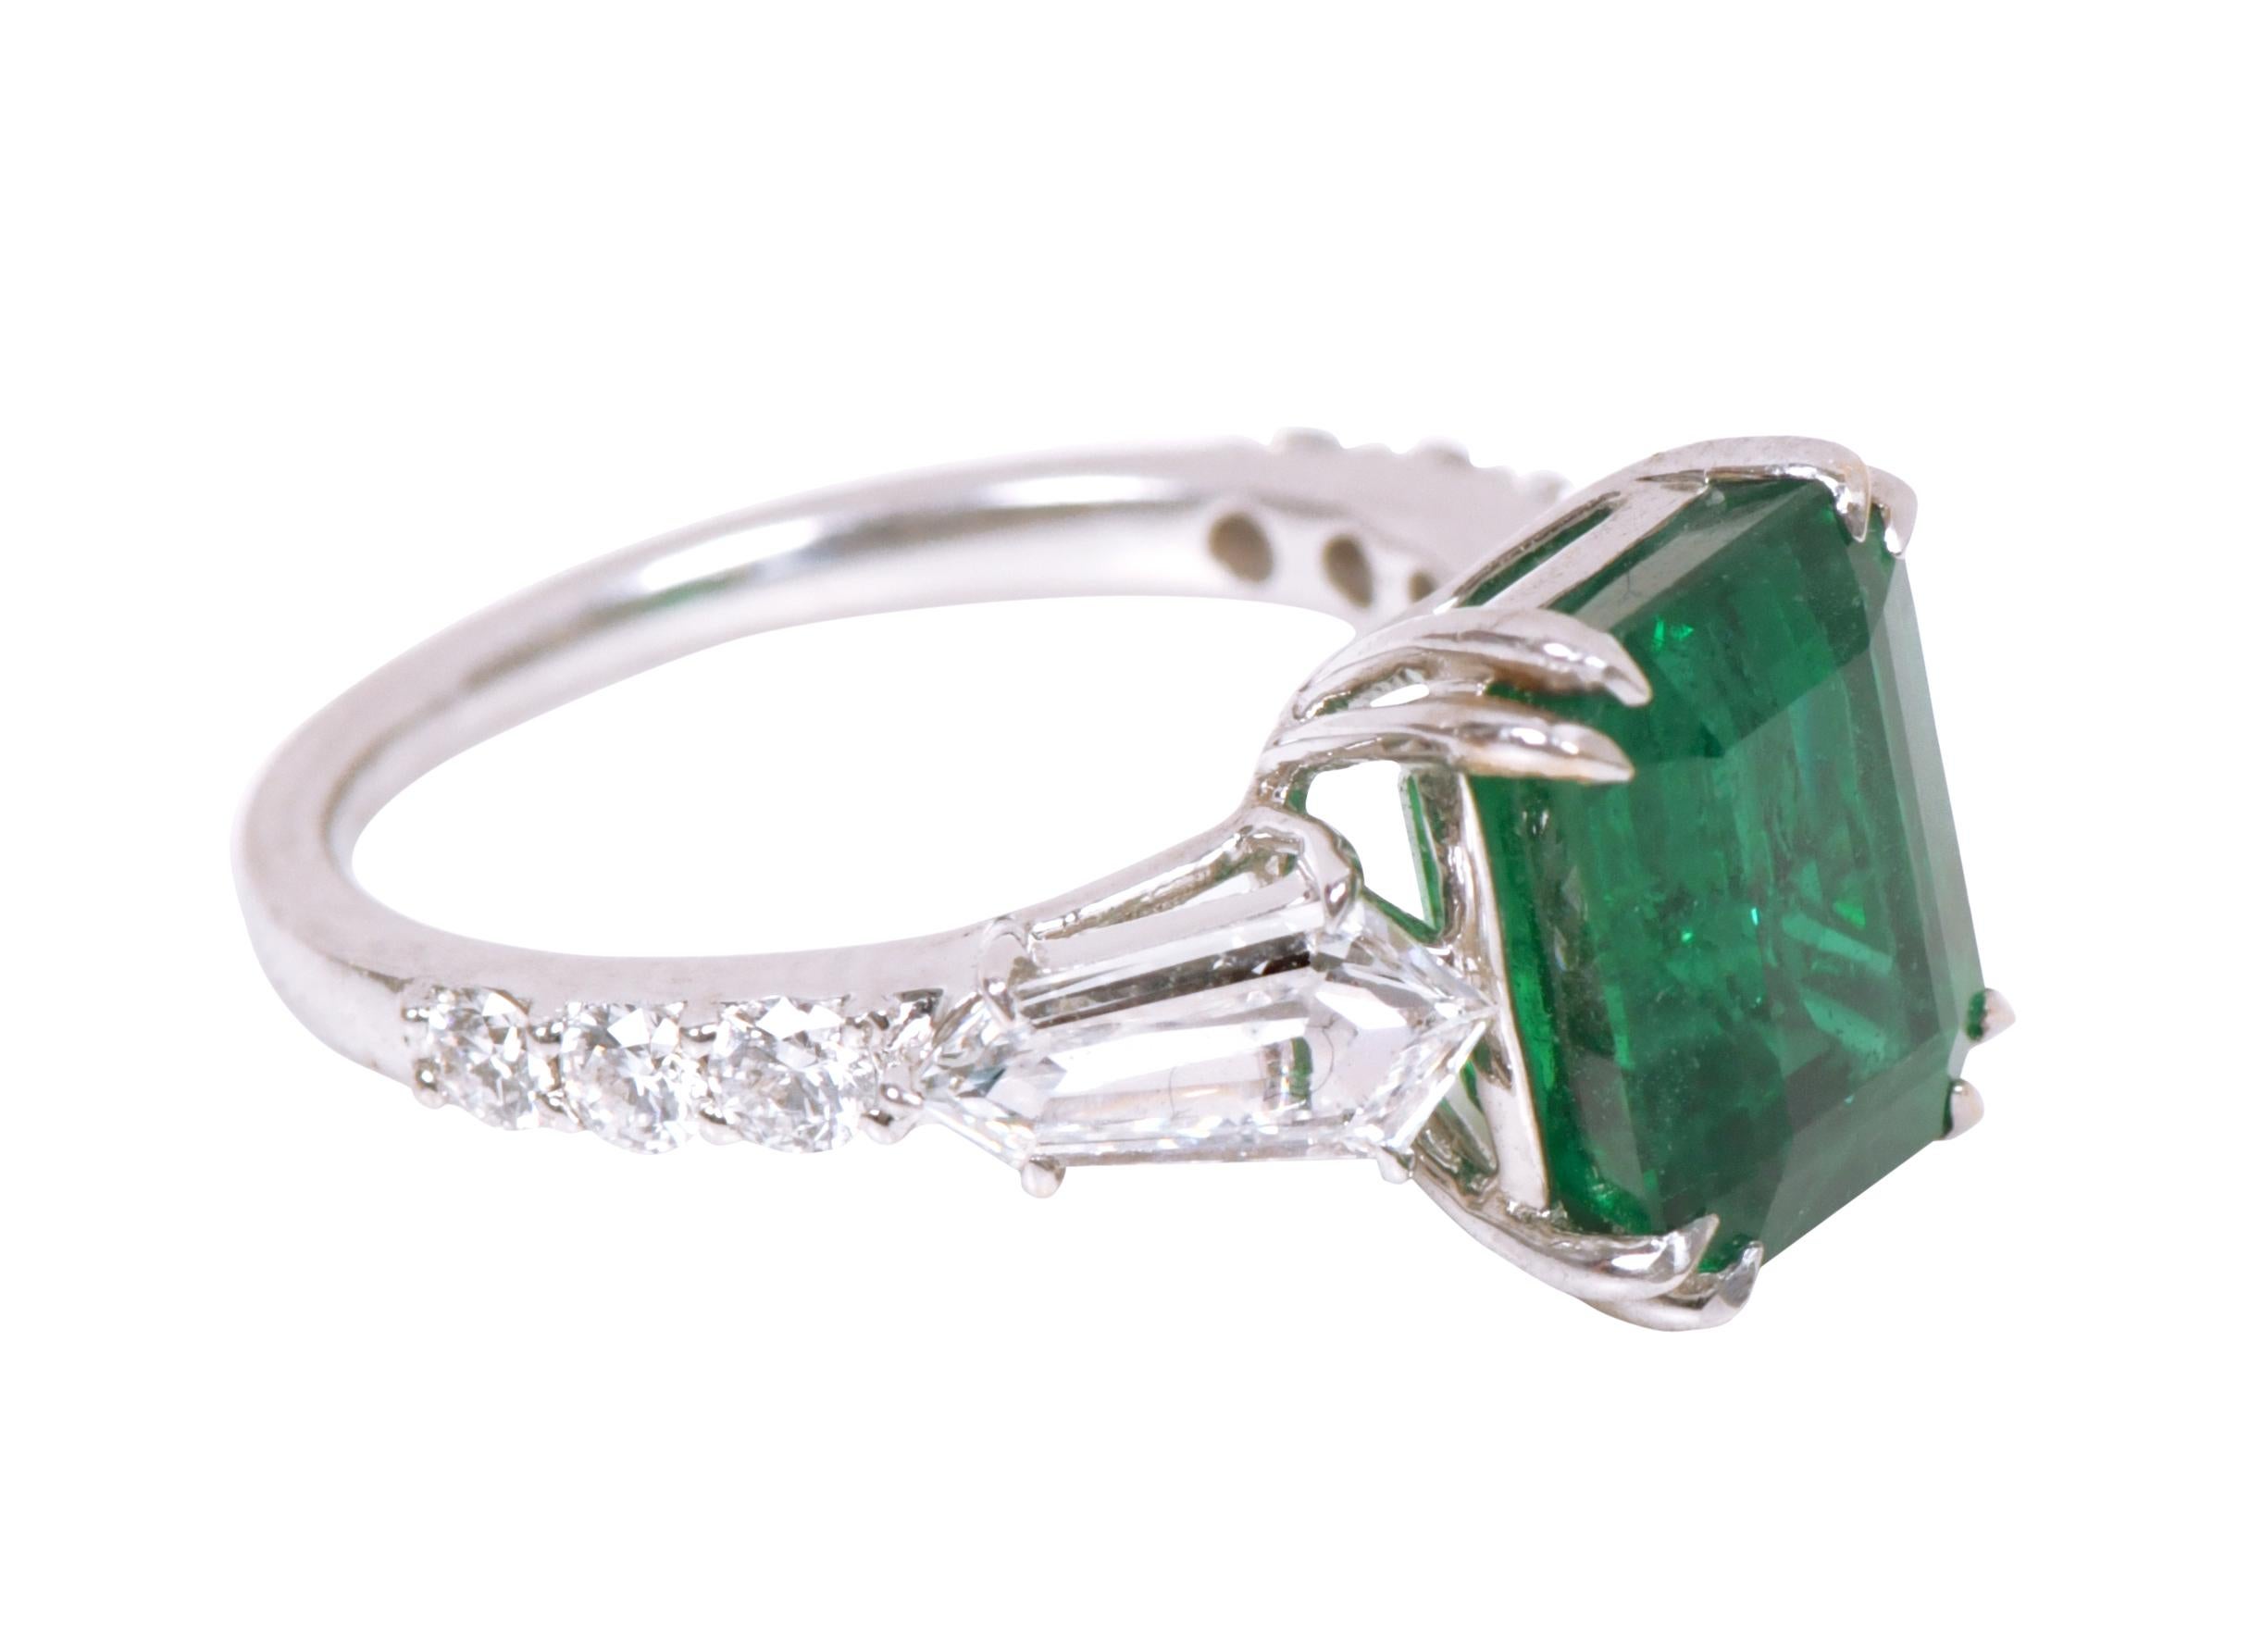 Contemporary 18 Karat White Gold 6.24 Carat Vivid Green Emerald and Diamond Cocktail Ring For Sale